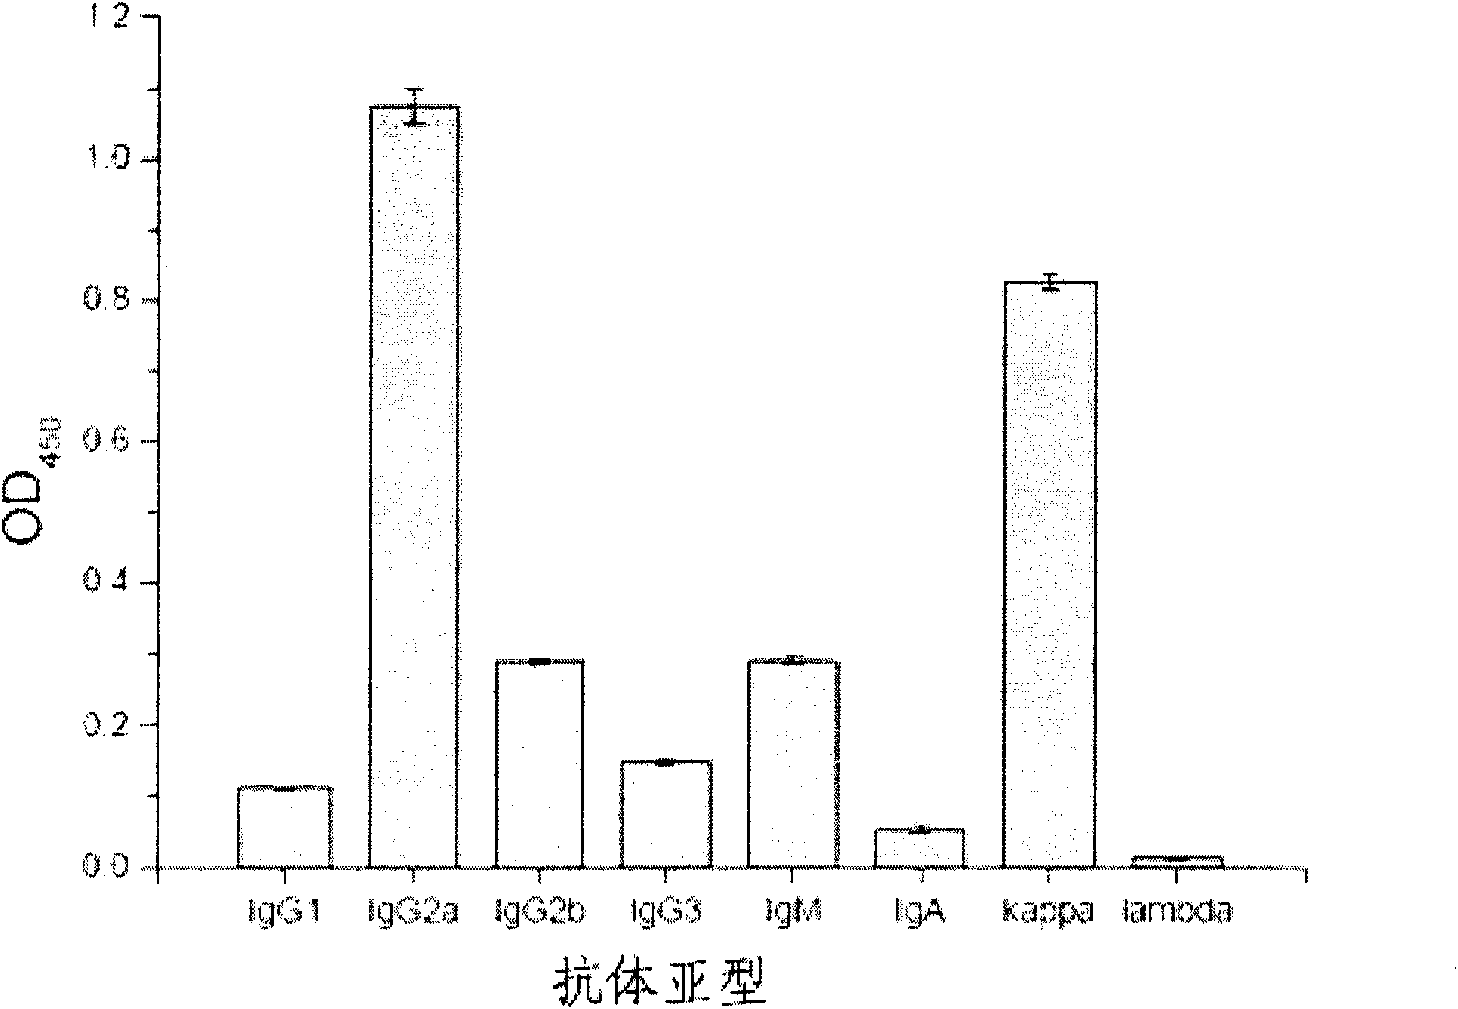 Monoclonal antibody for anti-human CEA, a composition containing same and application thereof